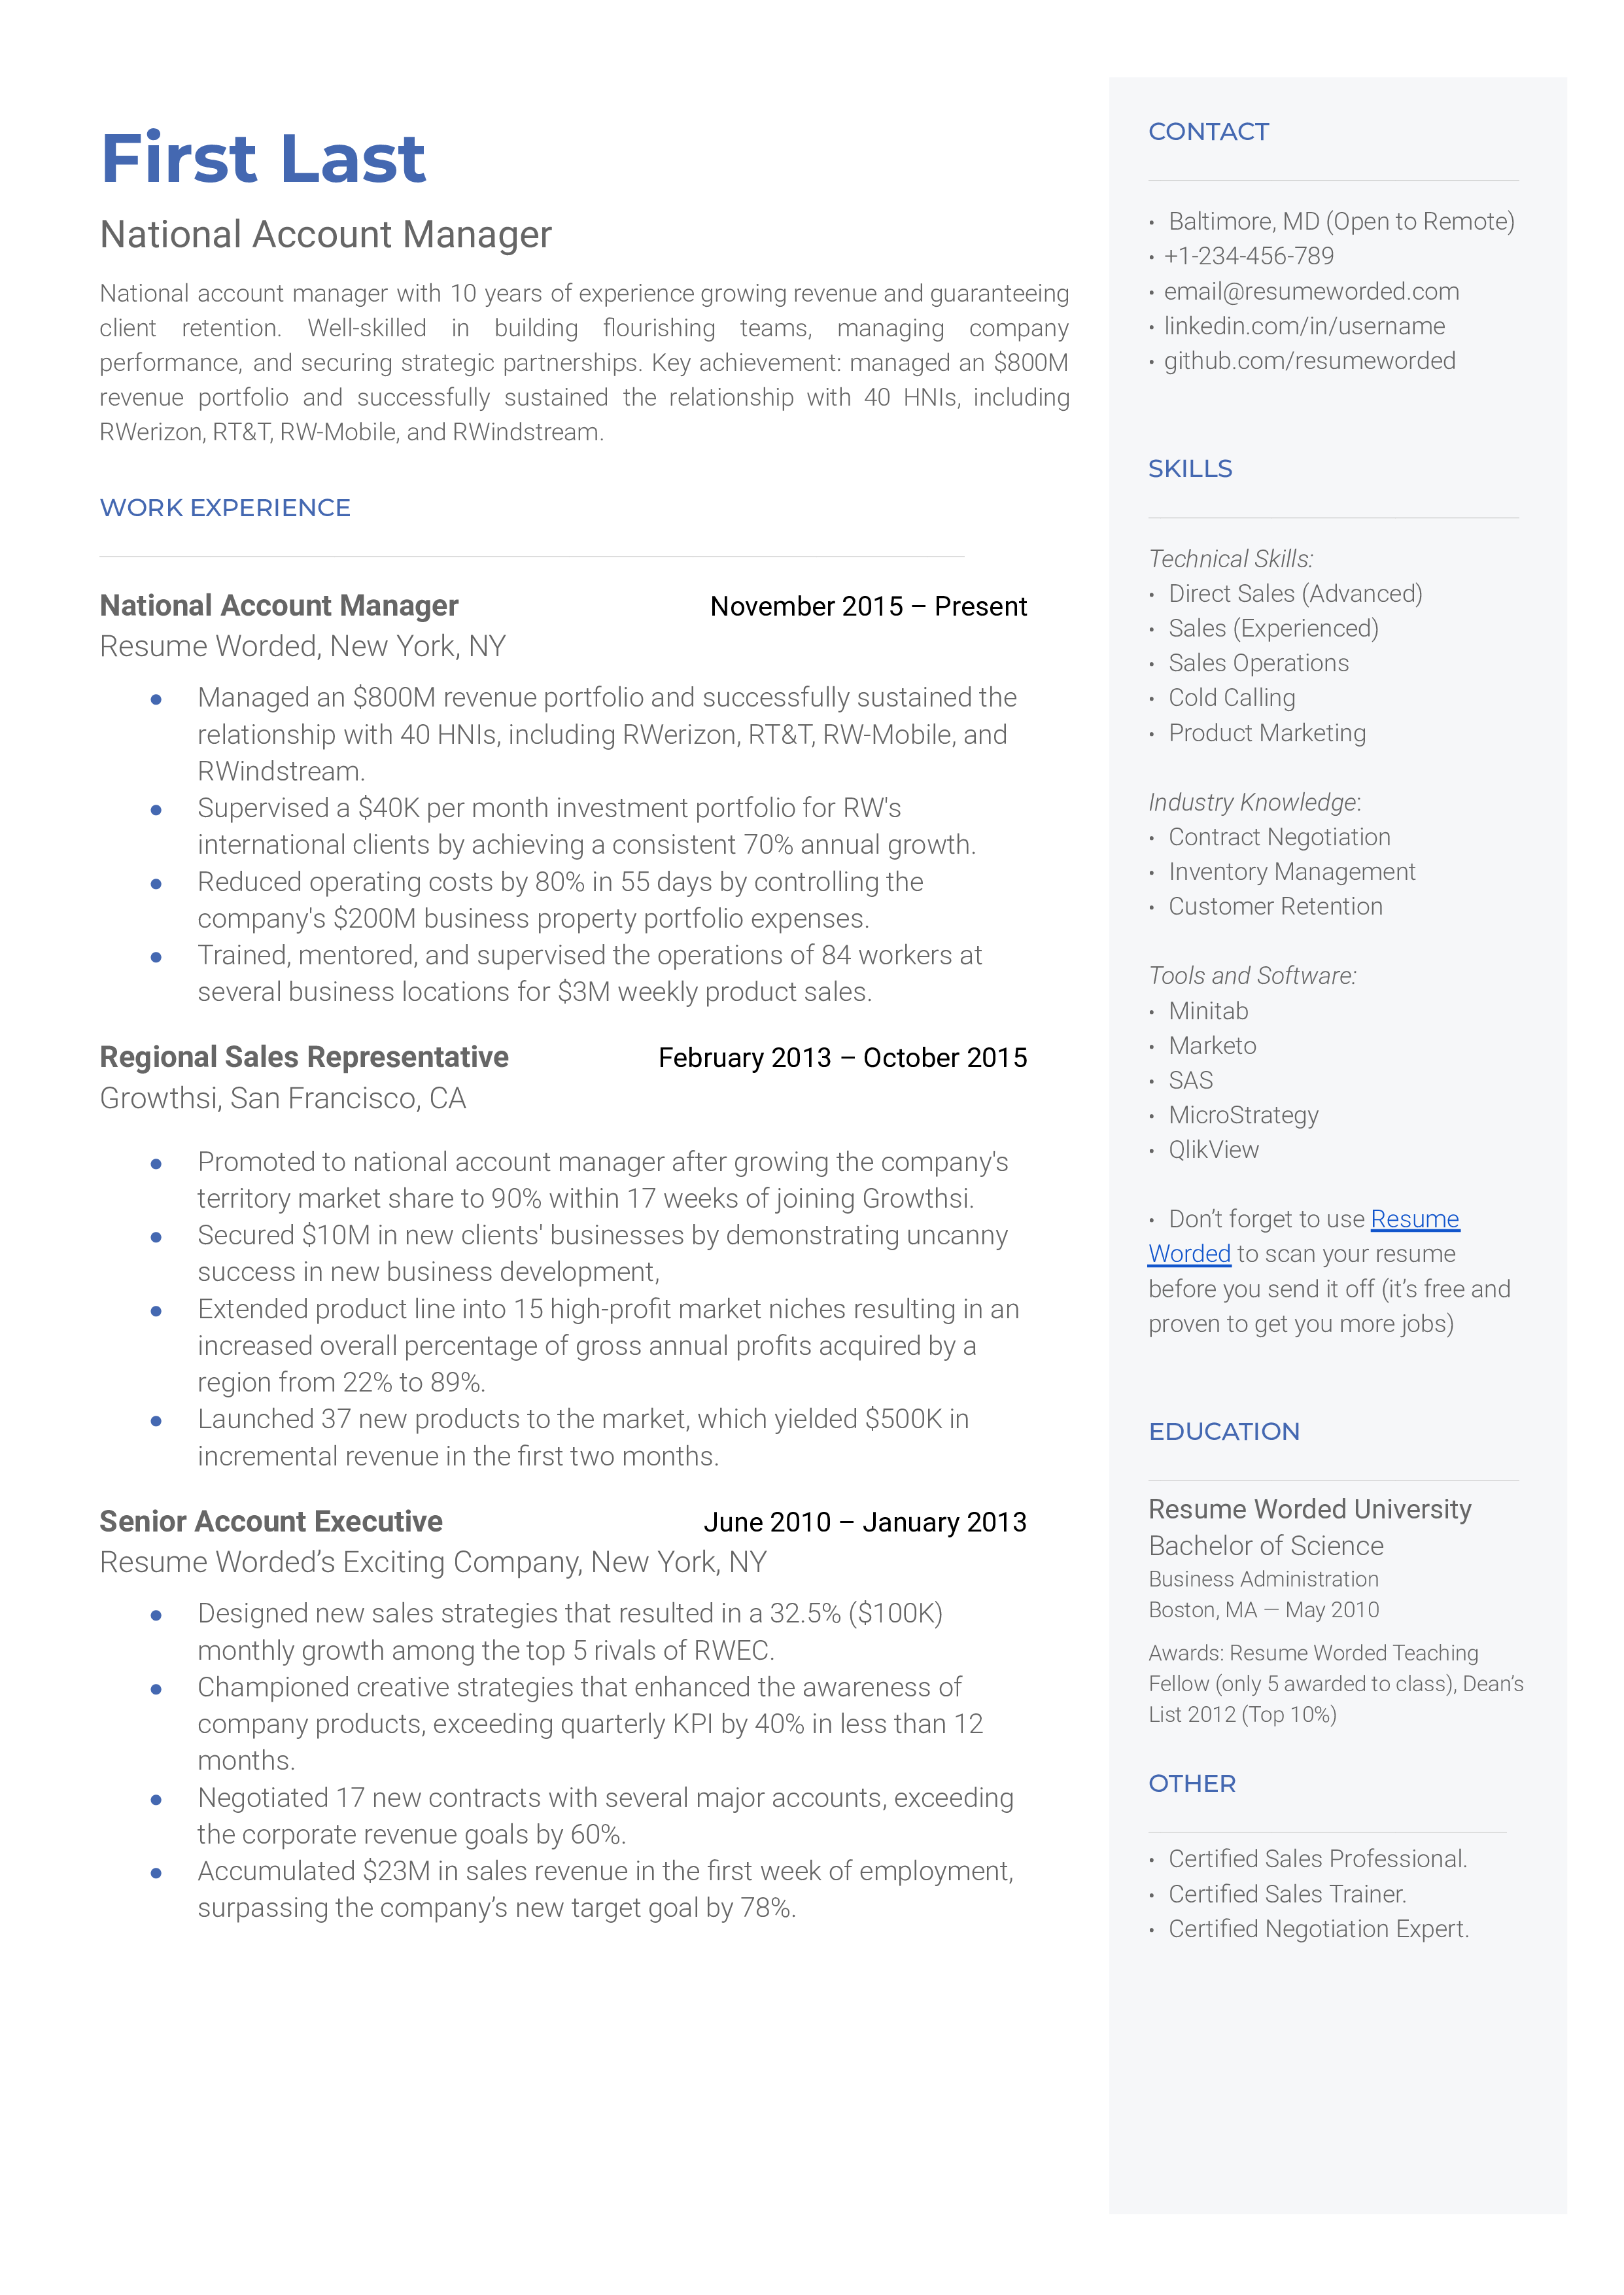 A well-crafted CV for a National Account Manager position.